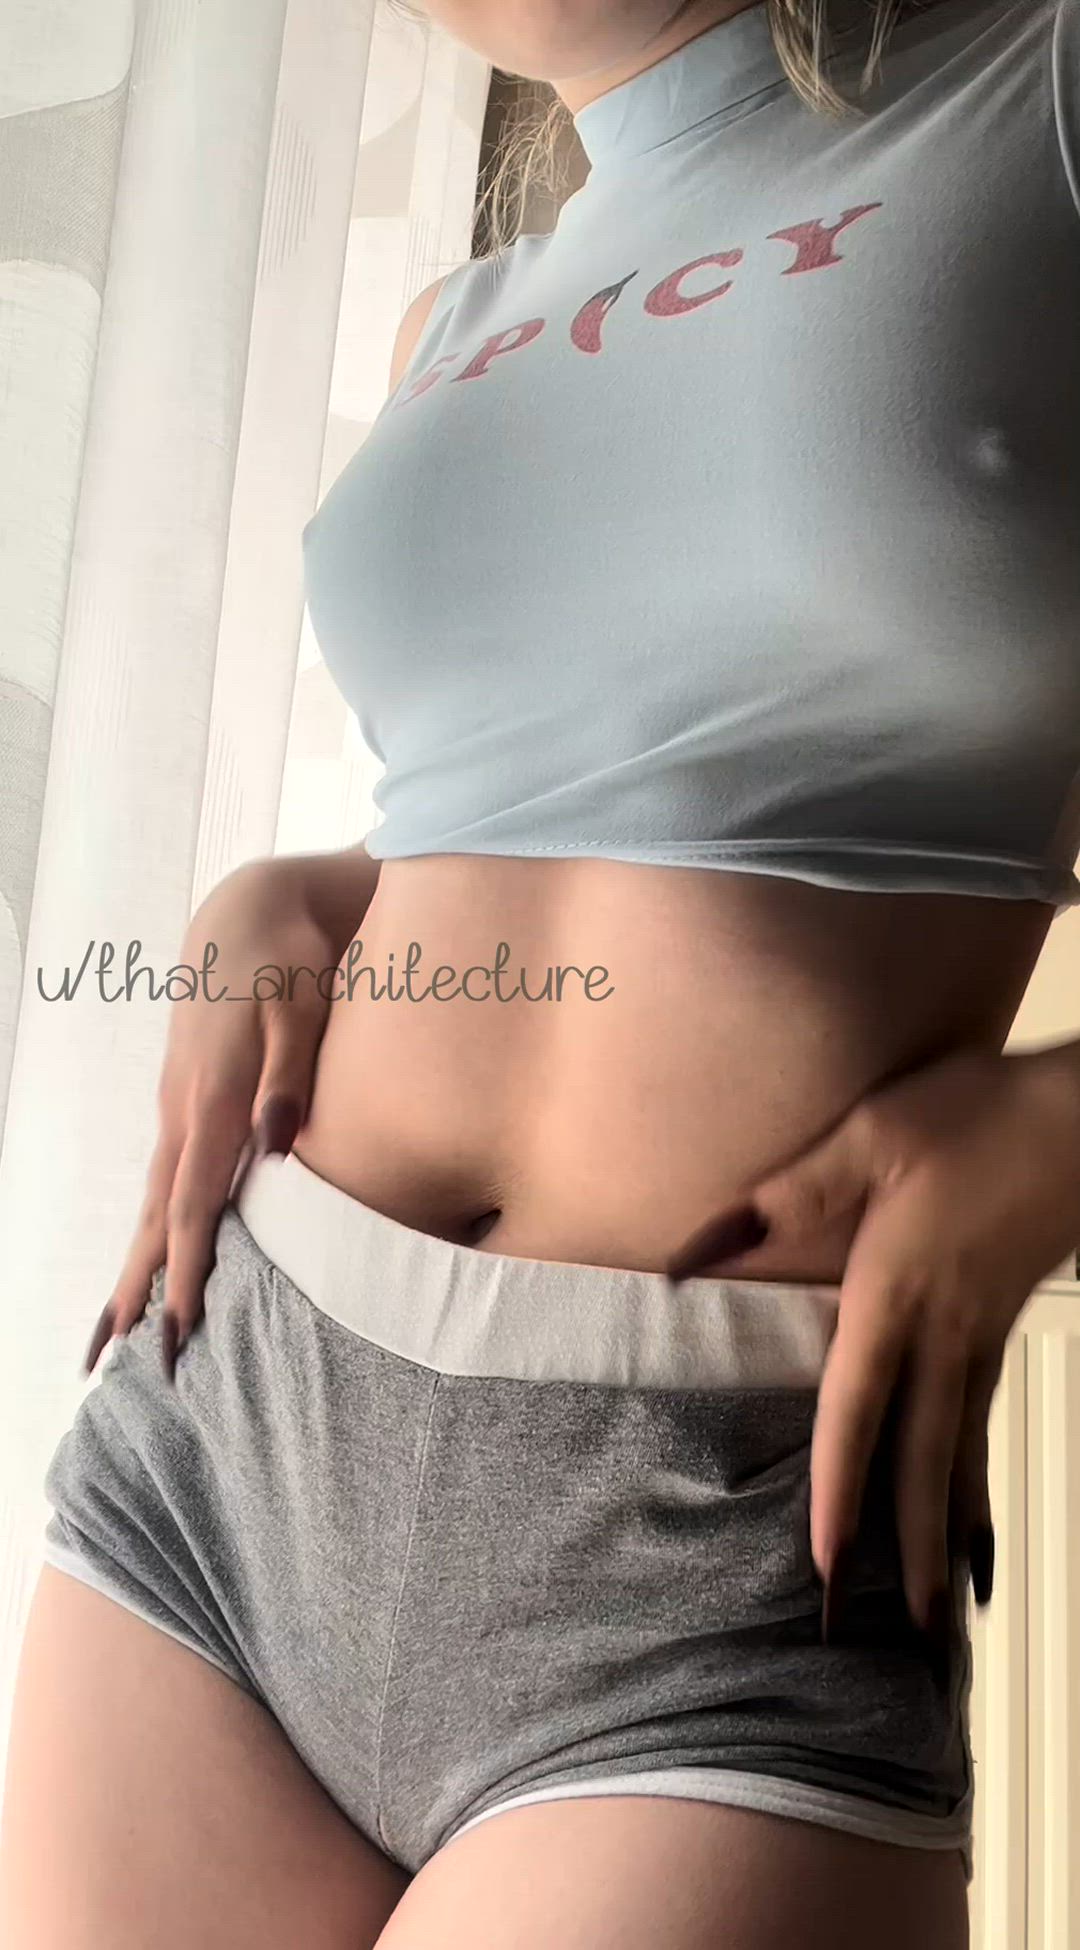 Ass porn video with onlyfans model itsmiababe02 <strong>@itsmiababe02</strong>